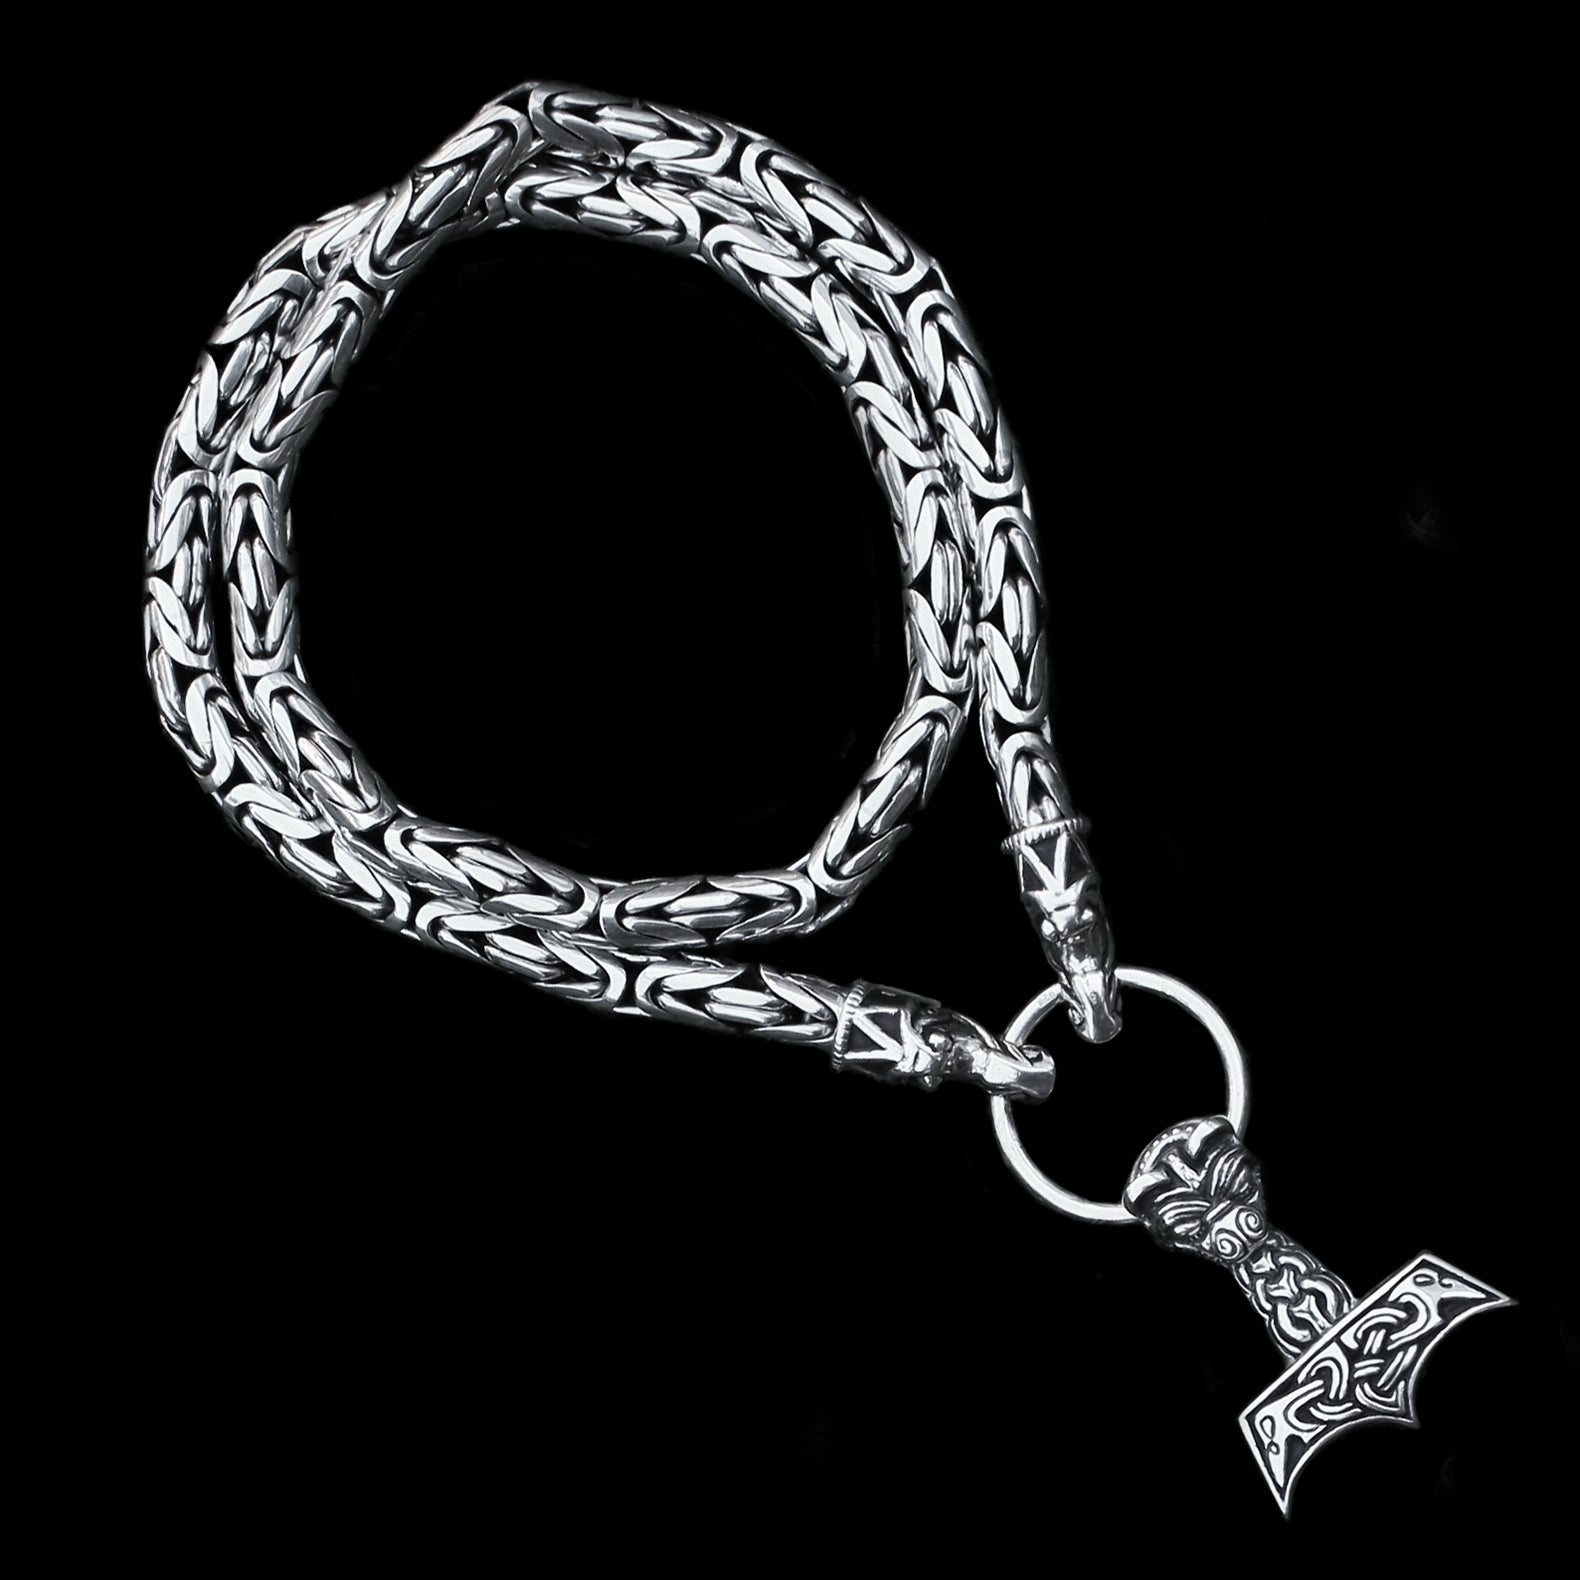 8mm Thick Silver King Chain Thors Hammer Necklace - Gotland Dragon Heads - Large Ferocious Thors Hammer